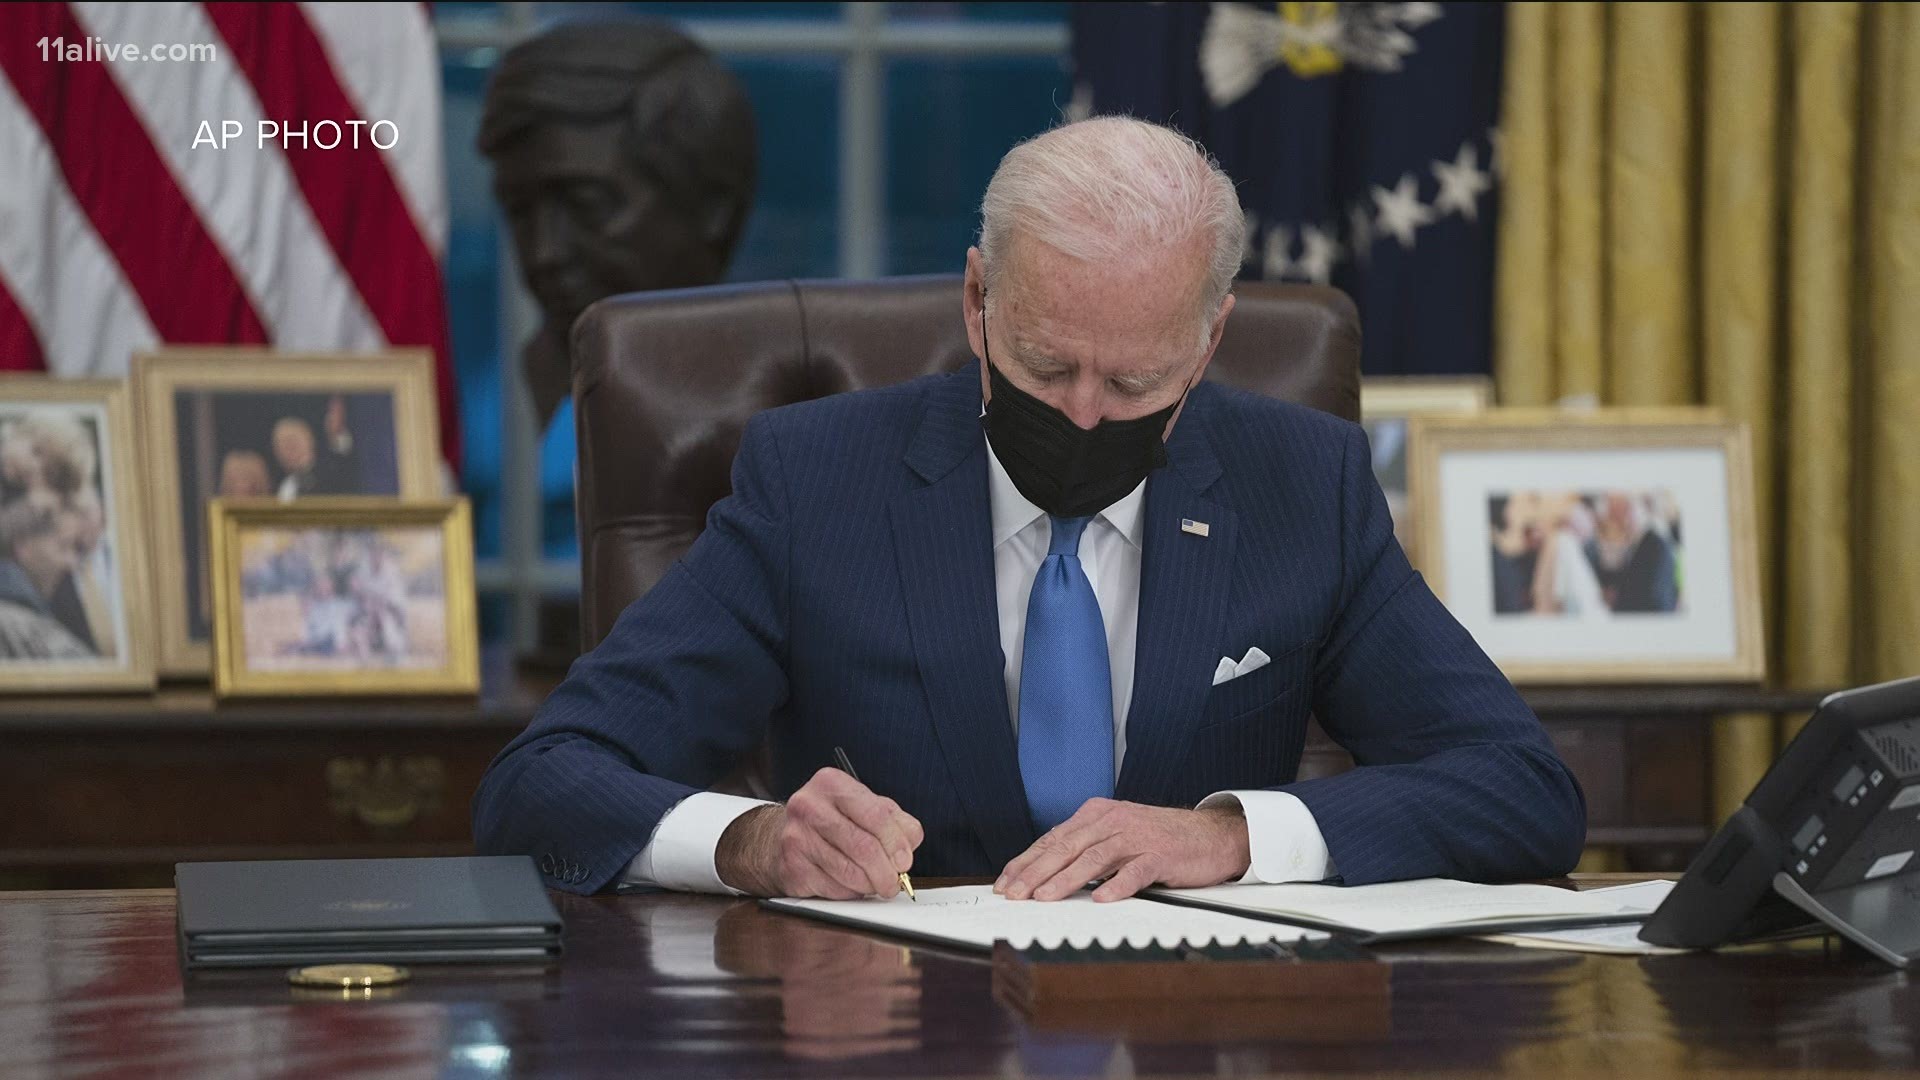 President Joe Biden issued an executive order to revoke the permit for the pipeline.